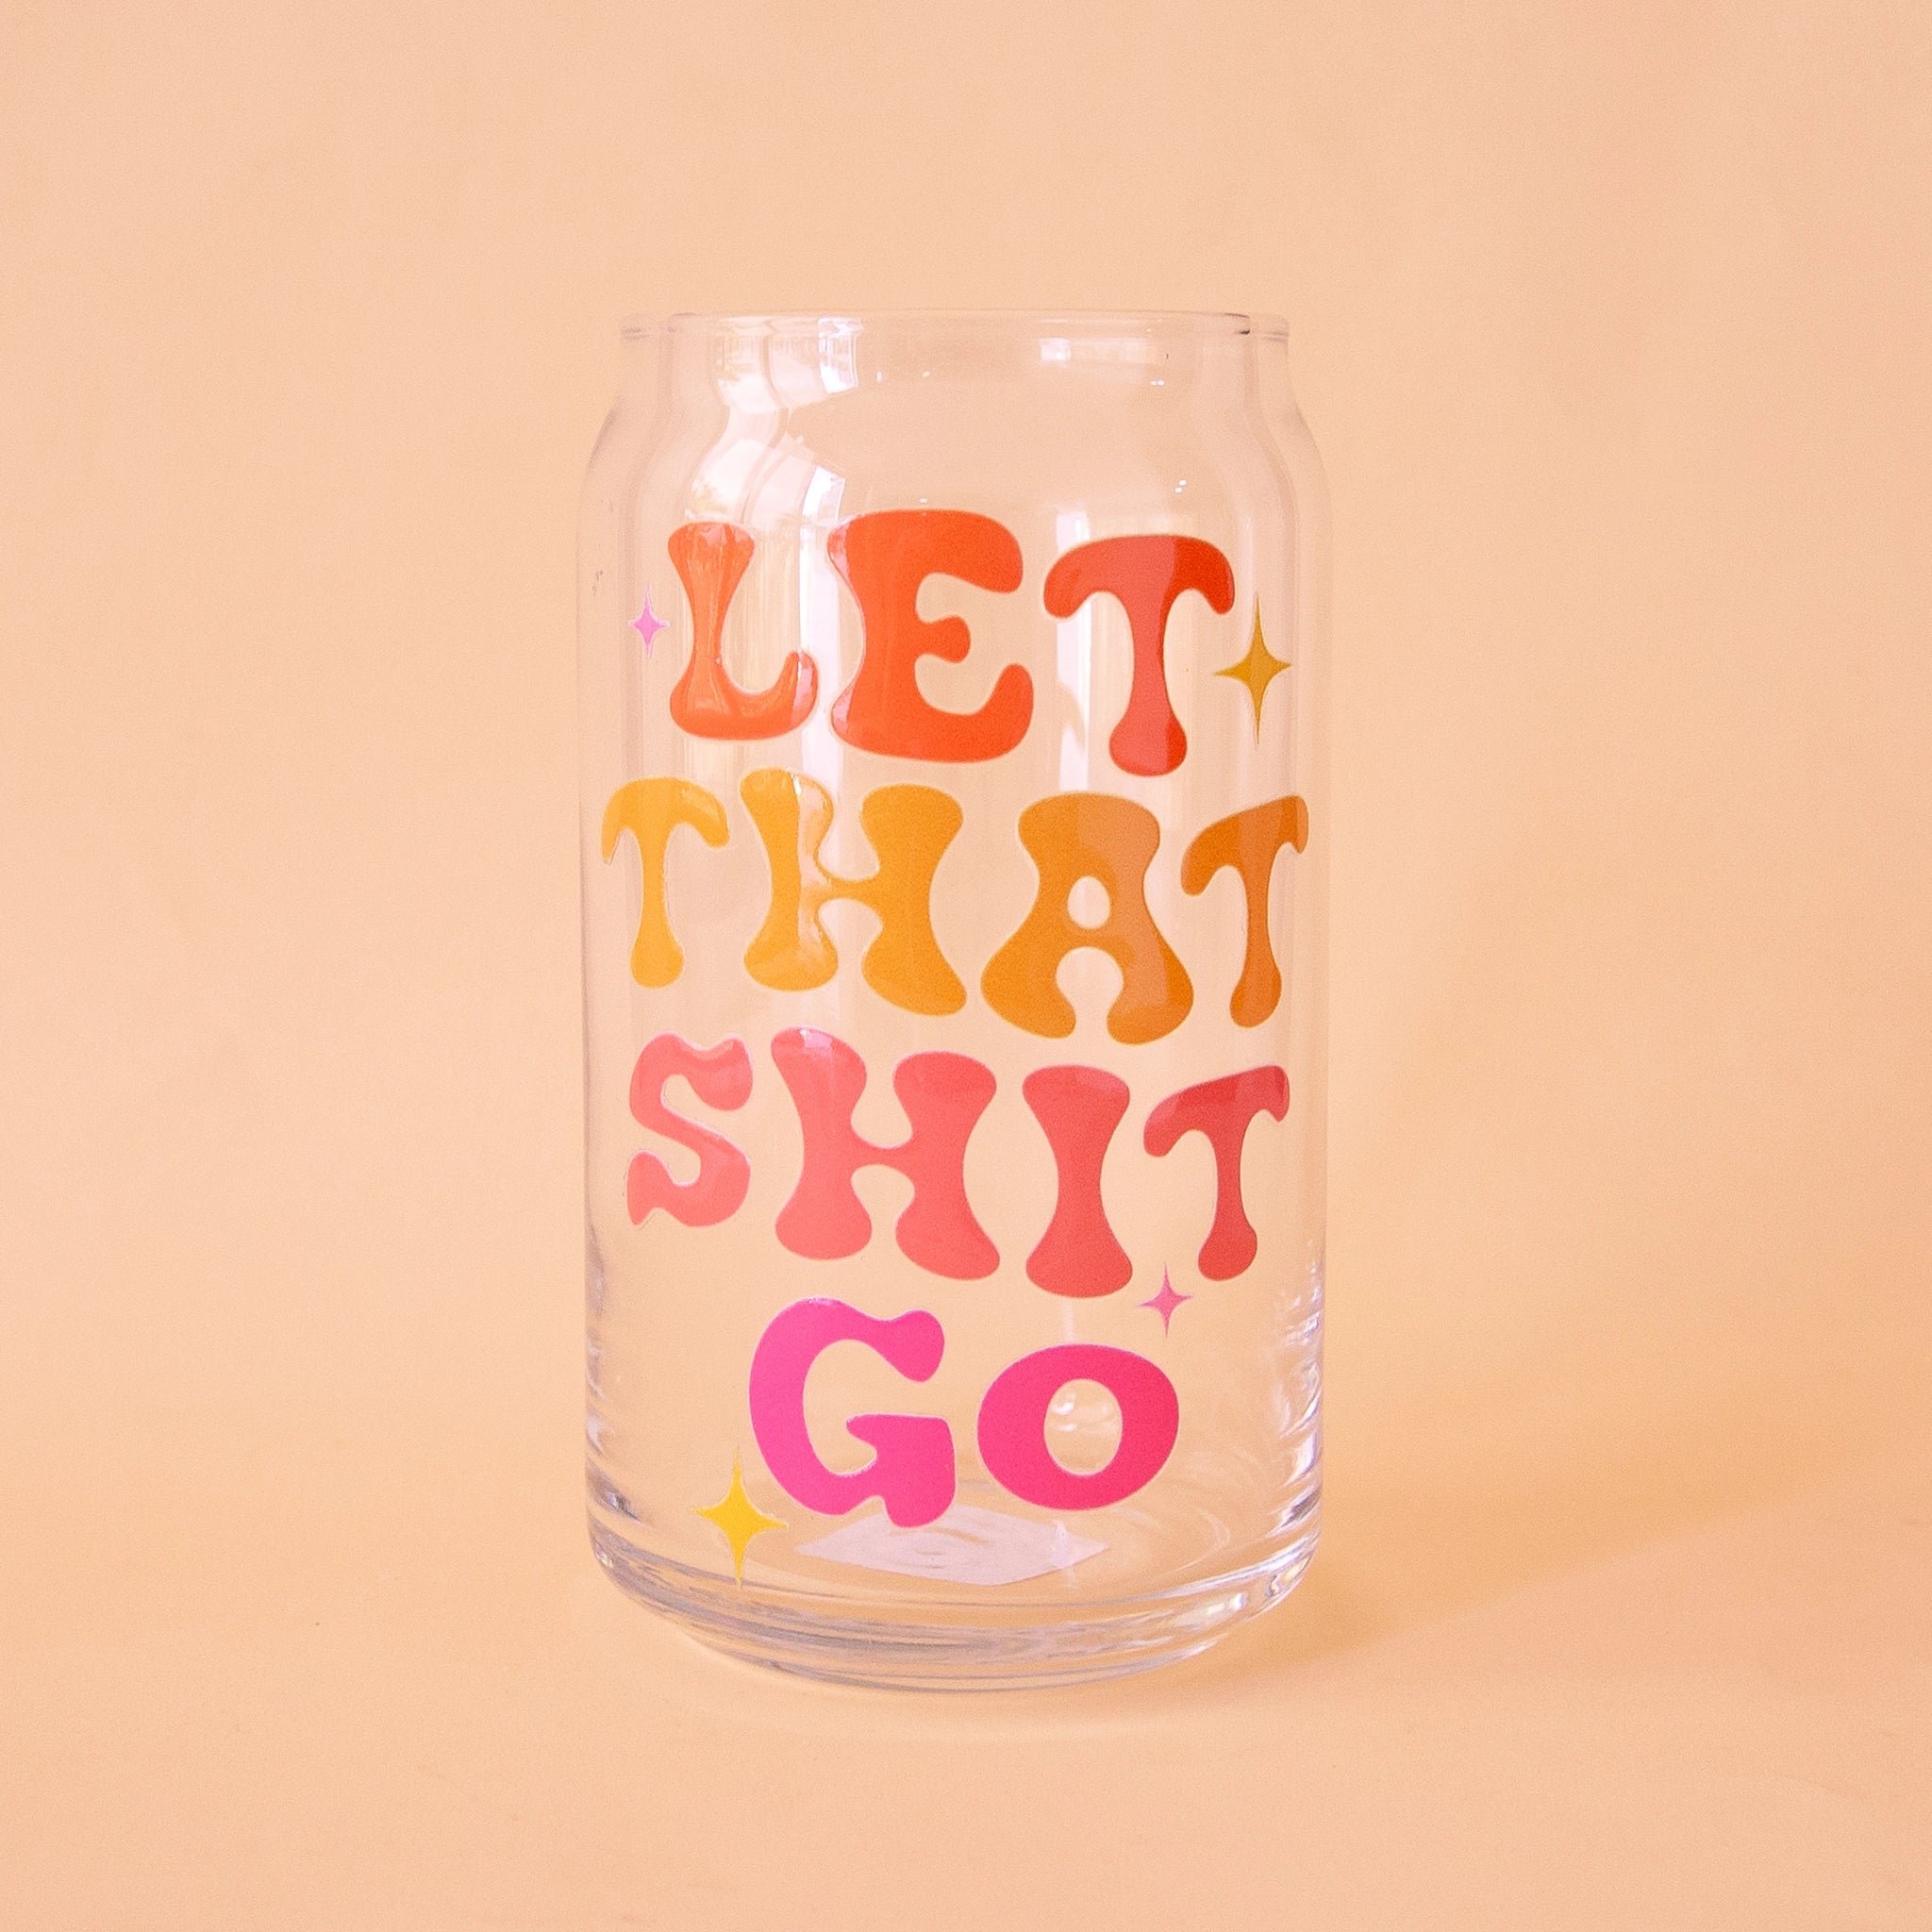 On a peach background is a drinking glass with red, pink and orange words on the front that reads, "Let That Shit Go".